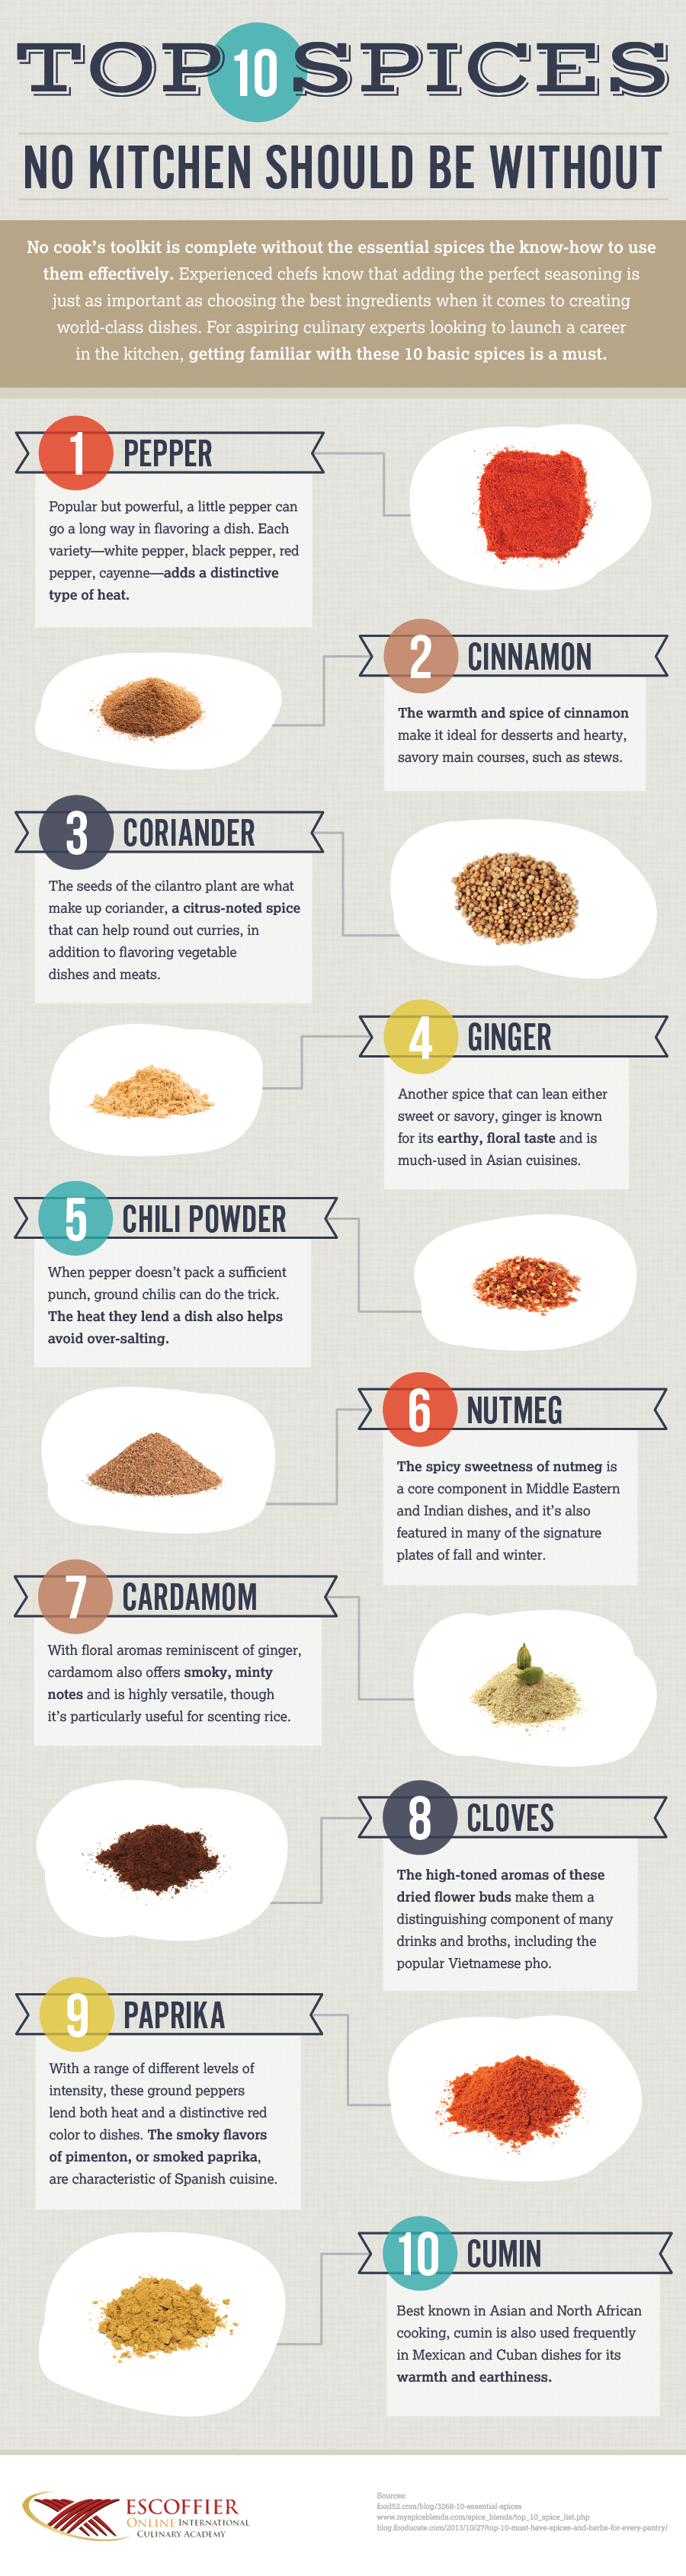 Top 10 Spices No Kitchen Should Be -